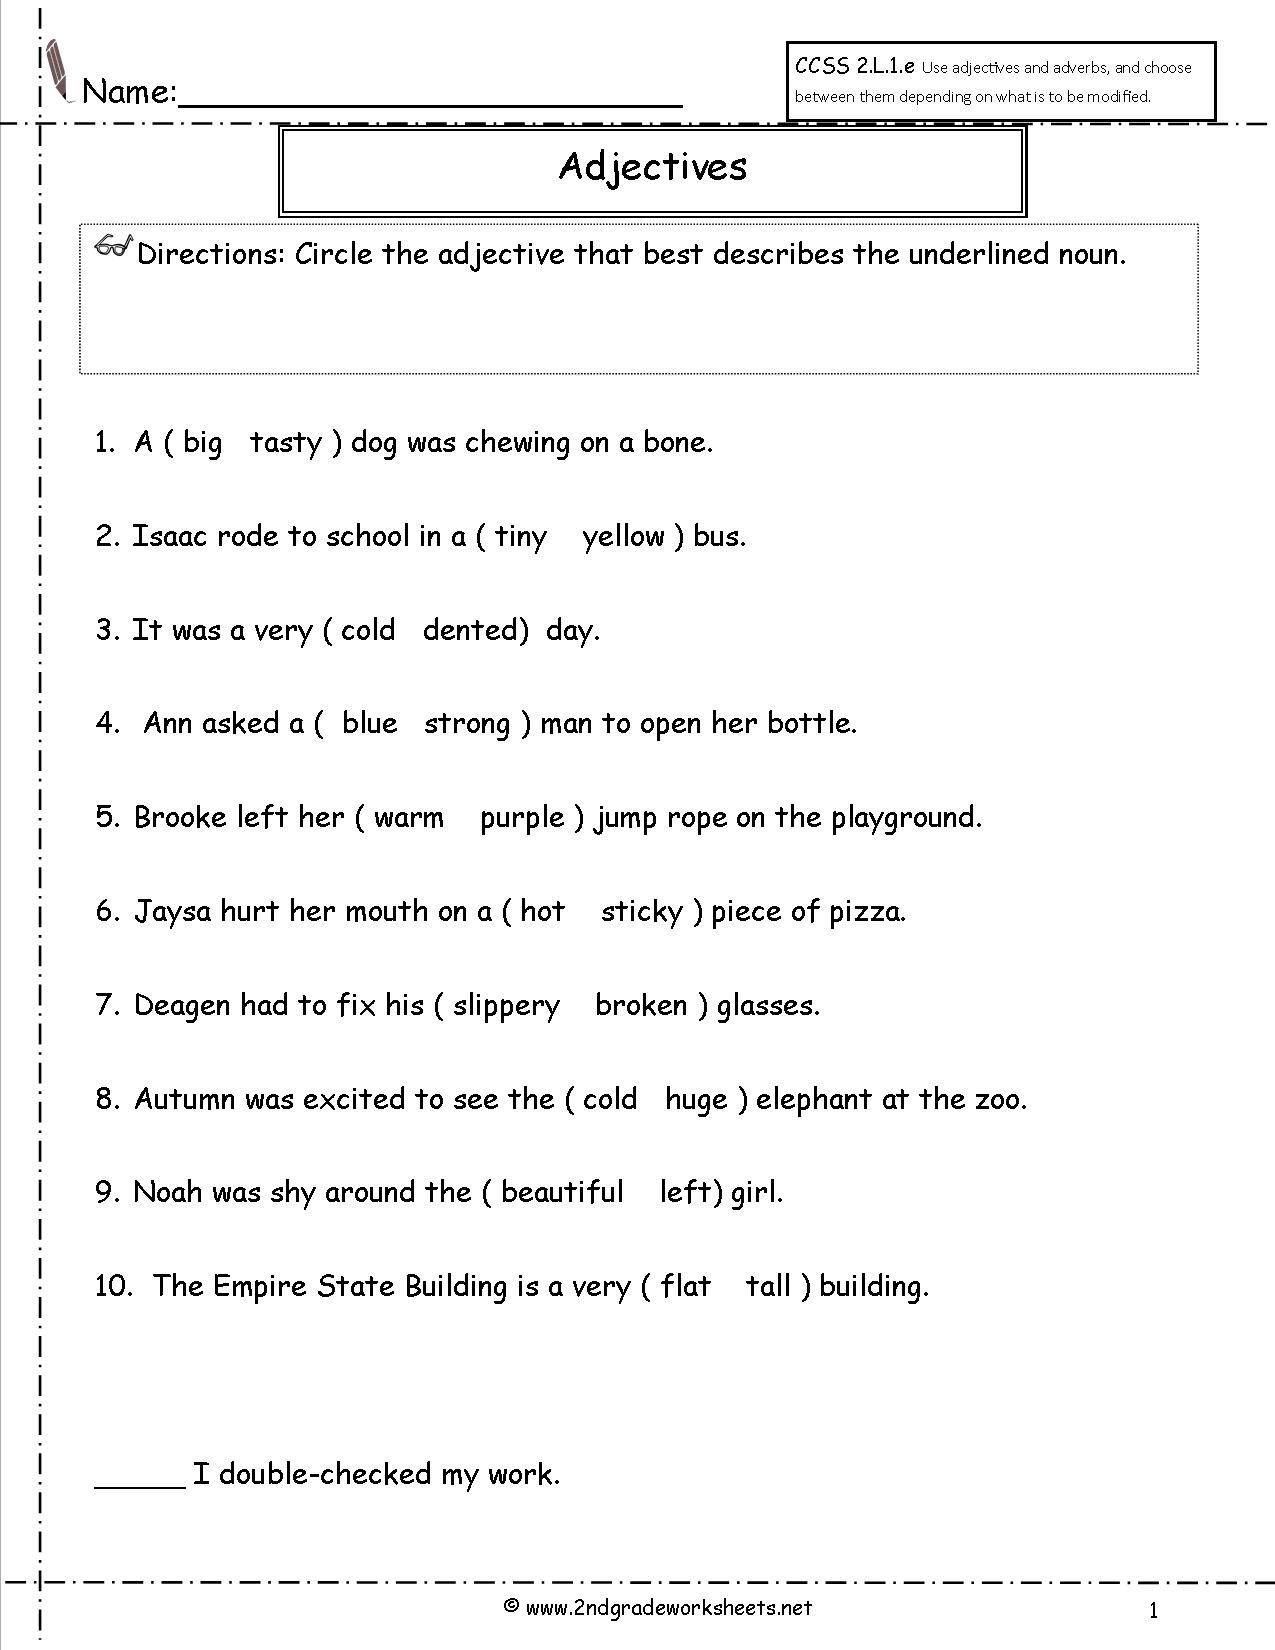 16 Best Images Of Adjectives Exercises Worksheets Printable Adjective Worksheets 2nd Grade